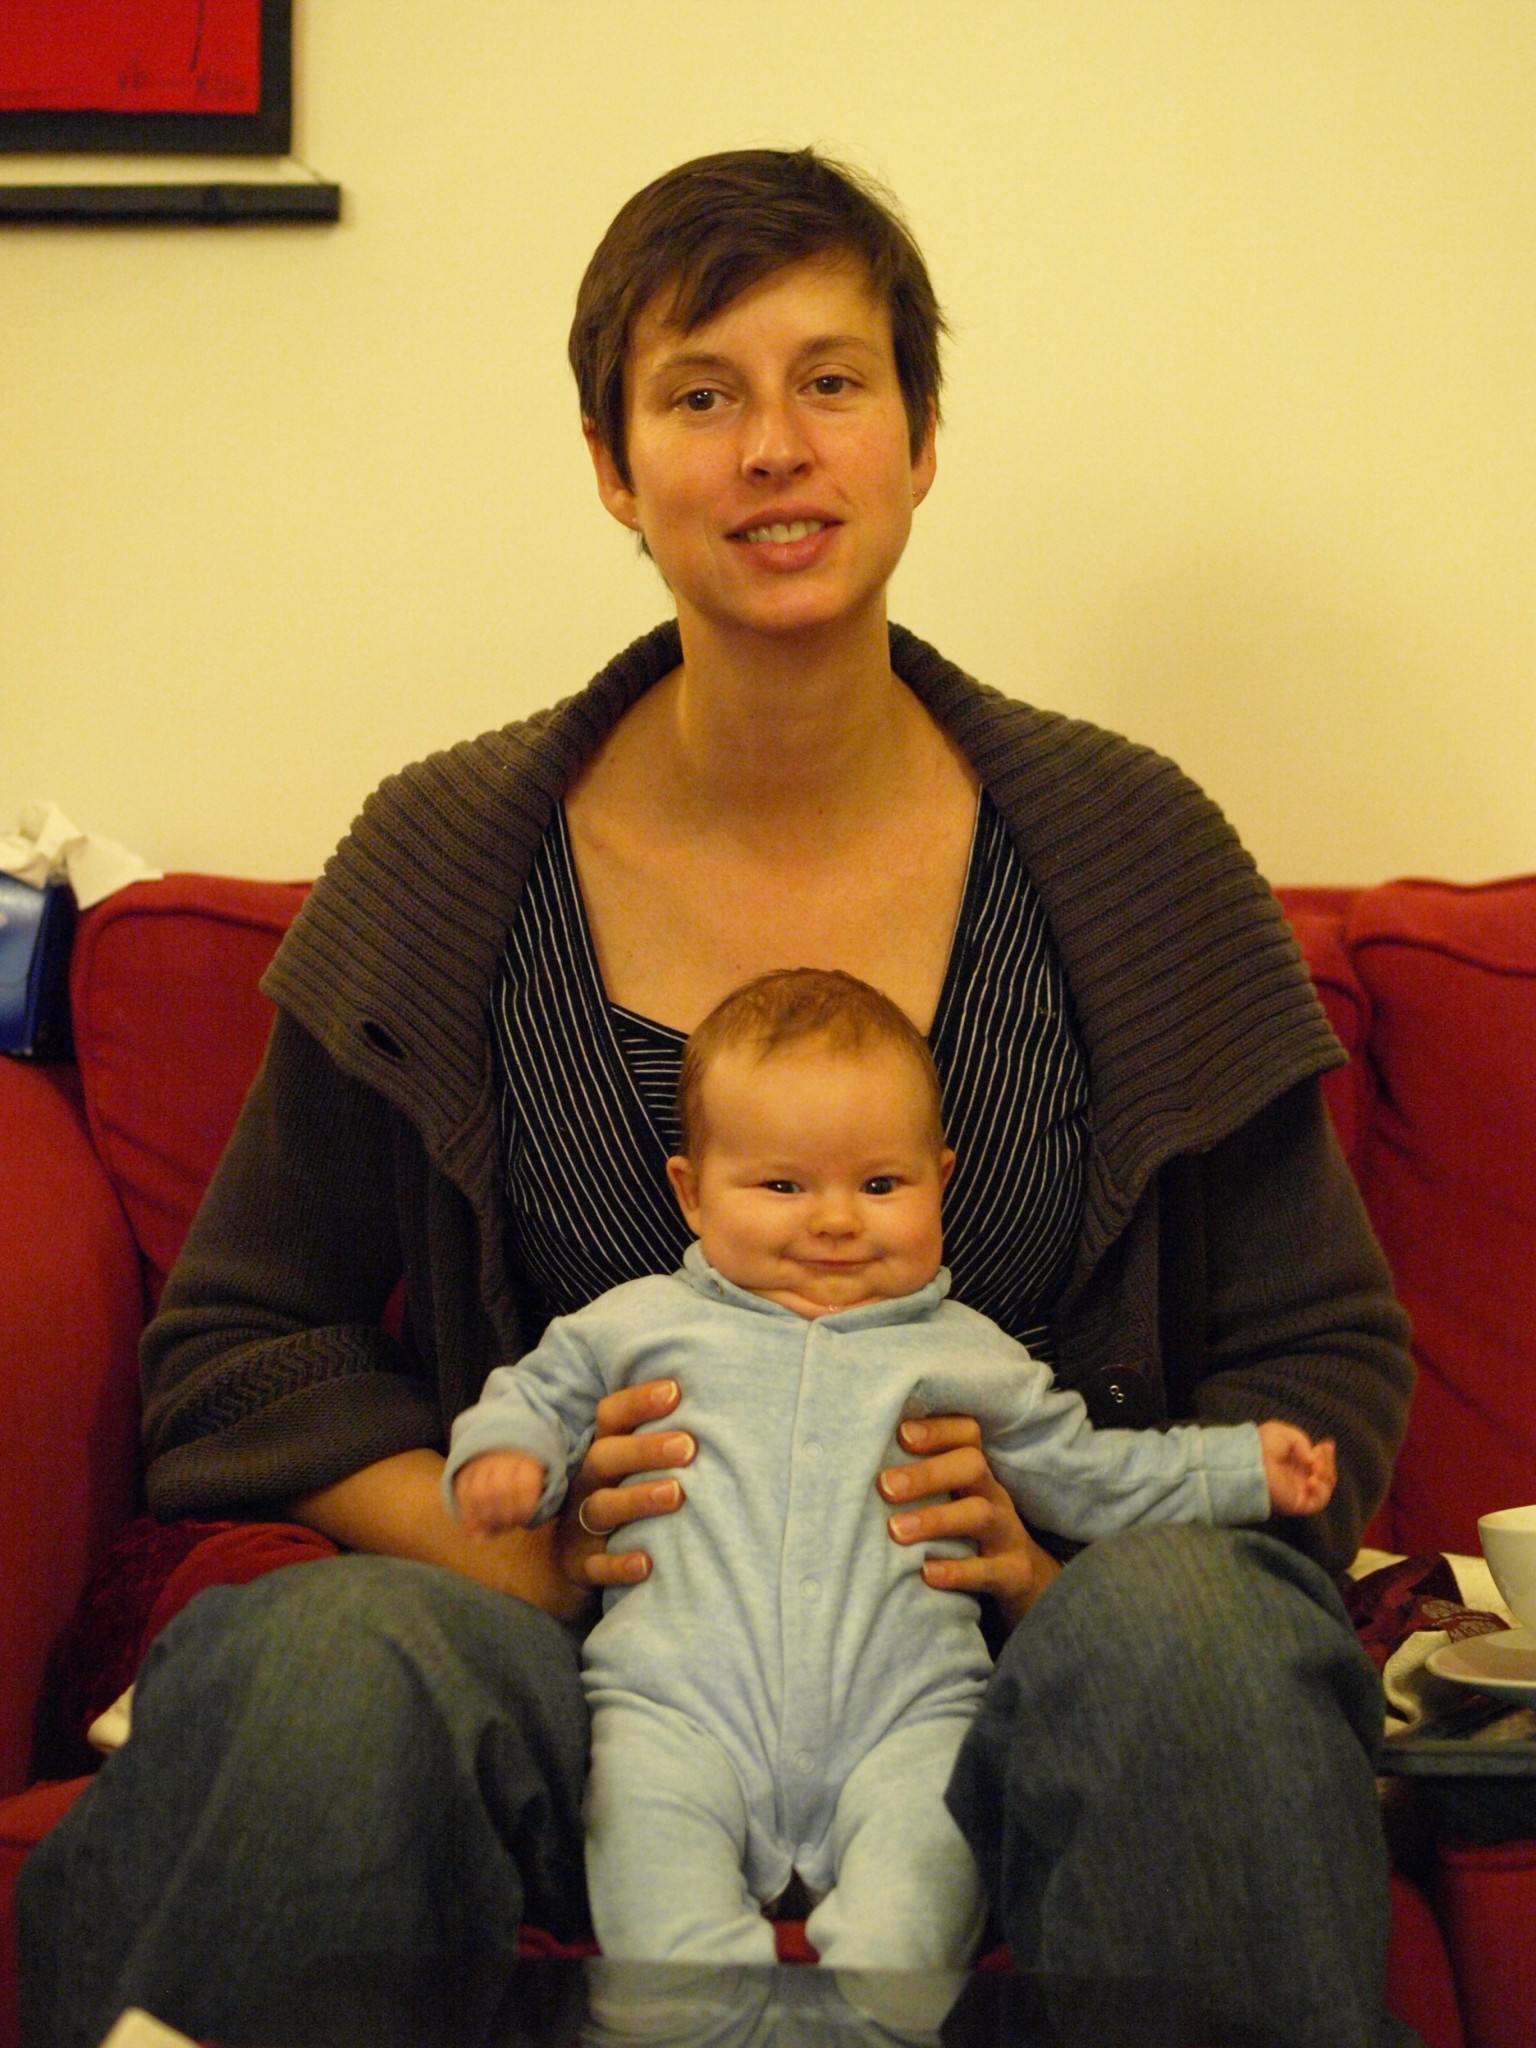 an image of a woman sitting with a baby